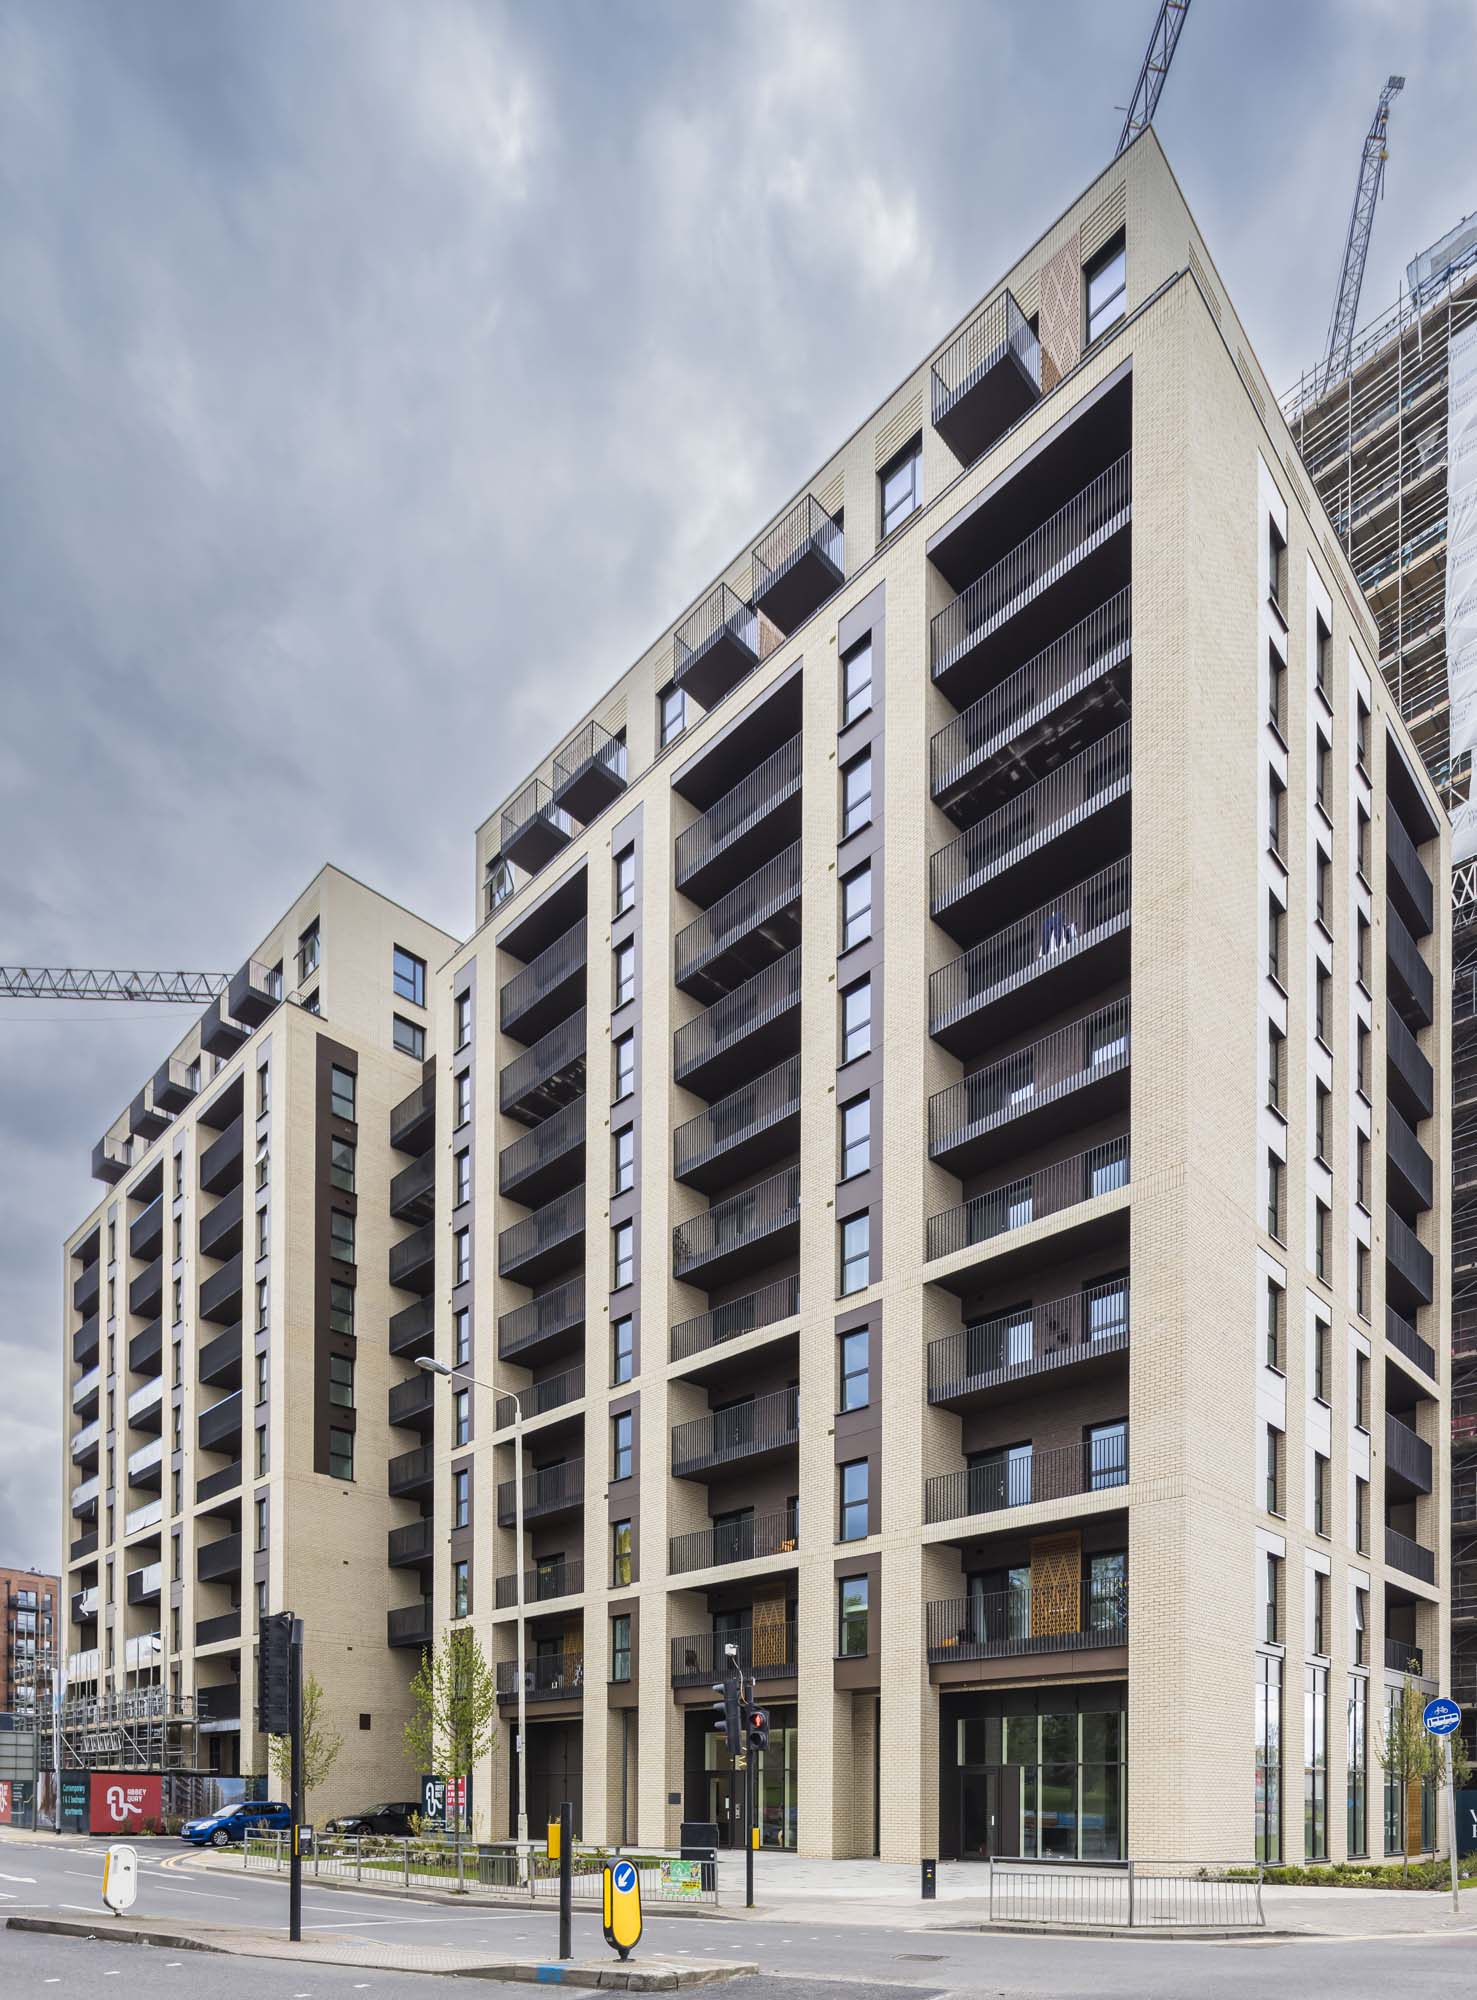 Weston Homes unveils new commercial space in the £350M Barking Riverside development